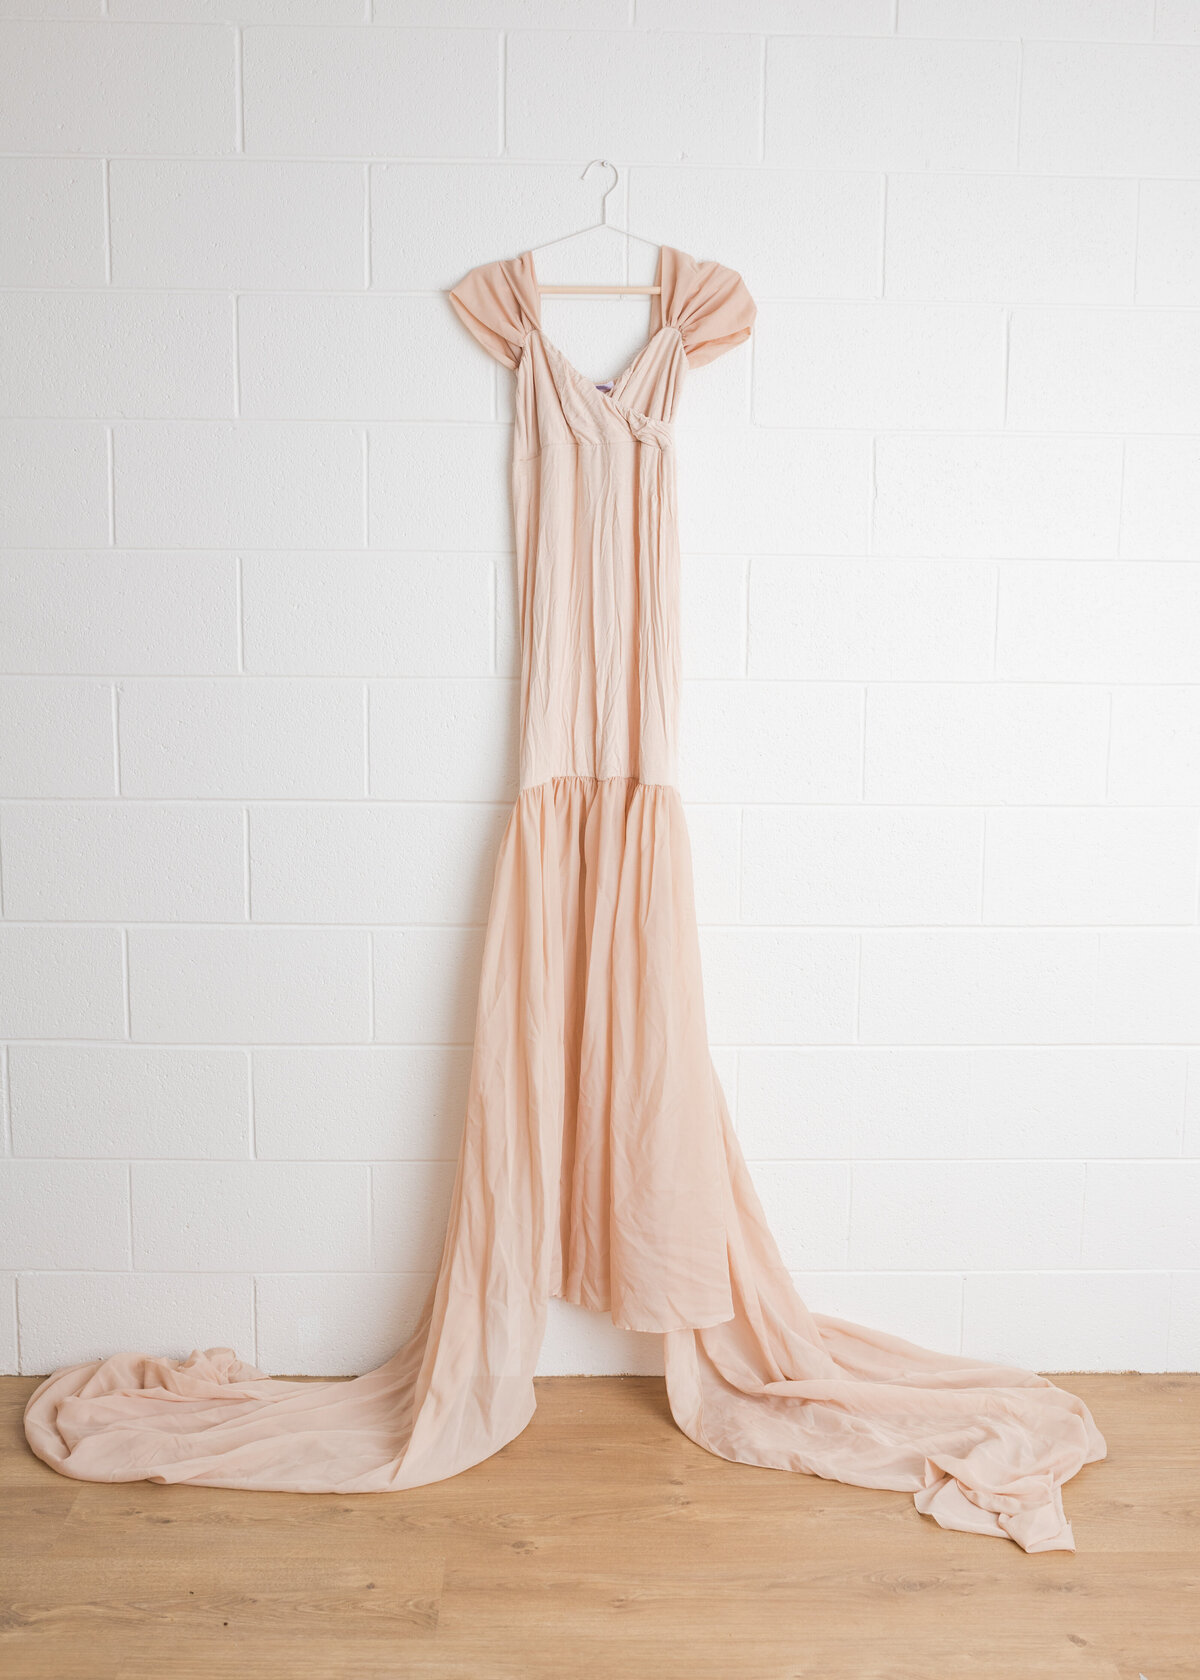 Blush coloured Maternity Gown with chiffon train by Chicaboo | Available for dress sizes 6-18 in Lauren Vanier Photography's Client Closet